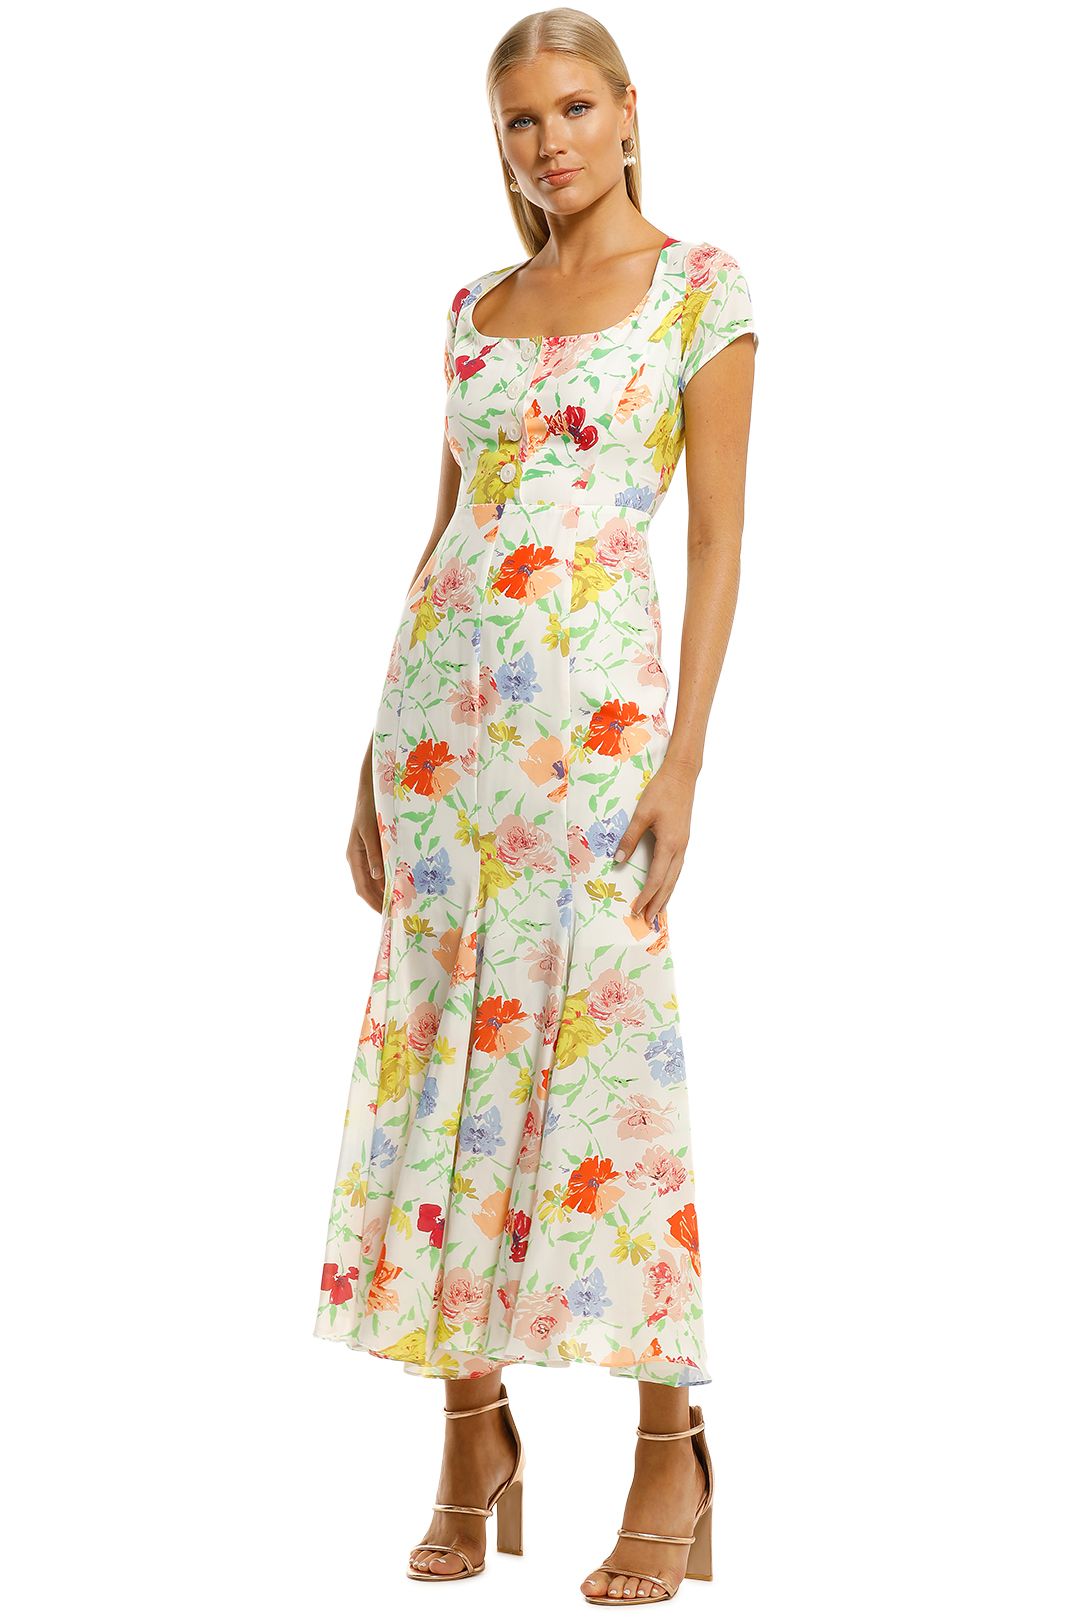 Alice-McCall-Picasso-Midi-Dress-Porcelain-Floral-Front